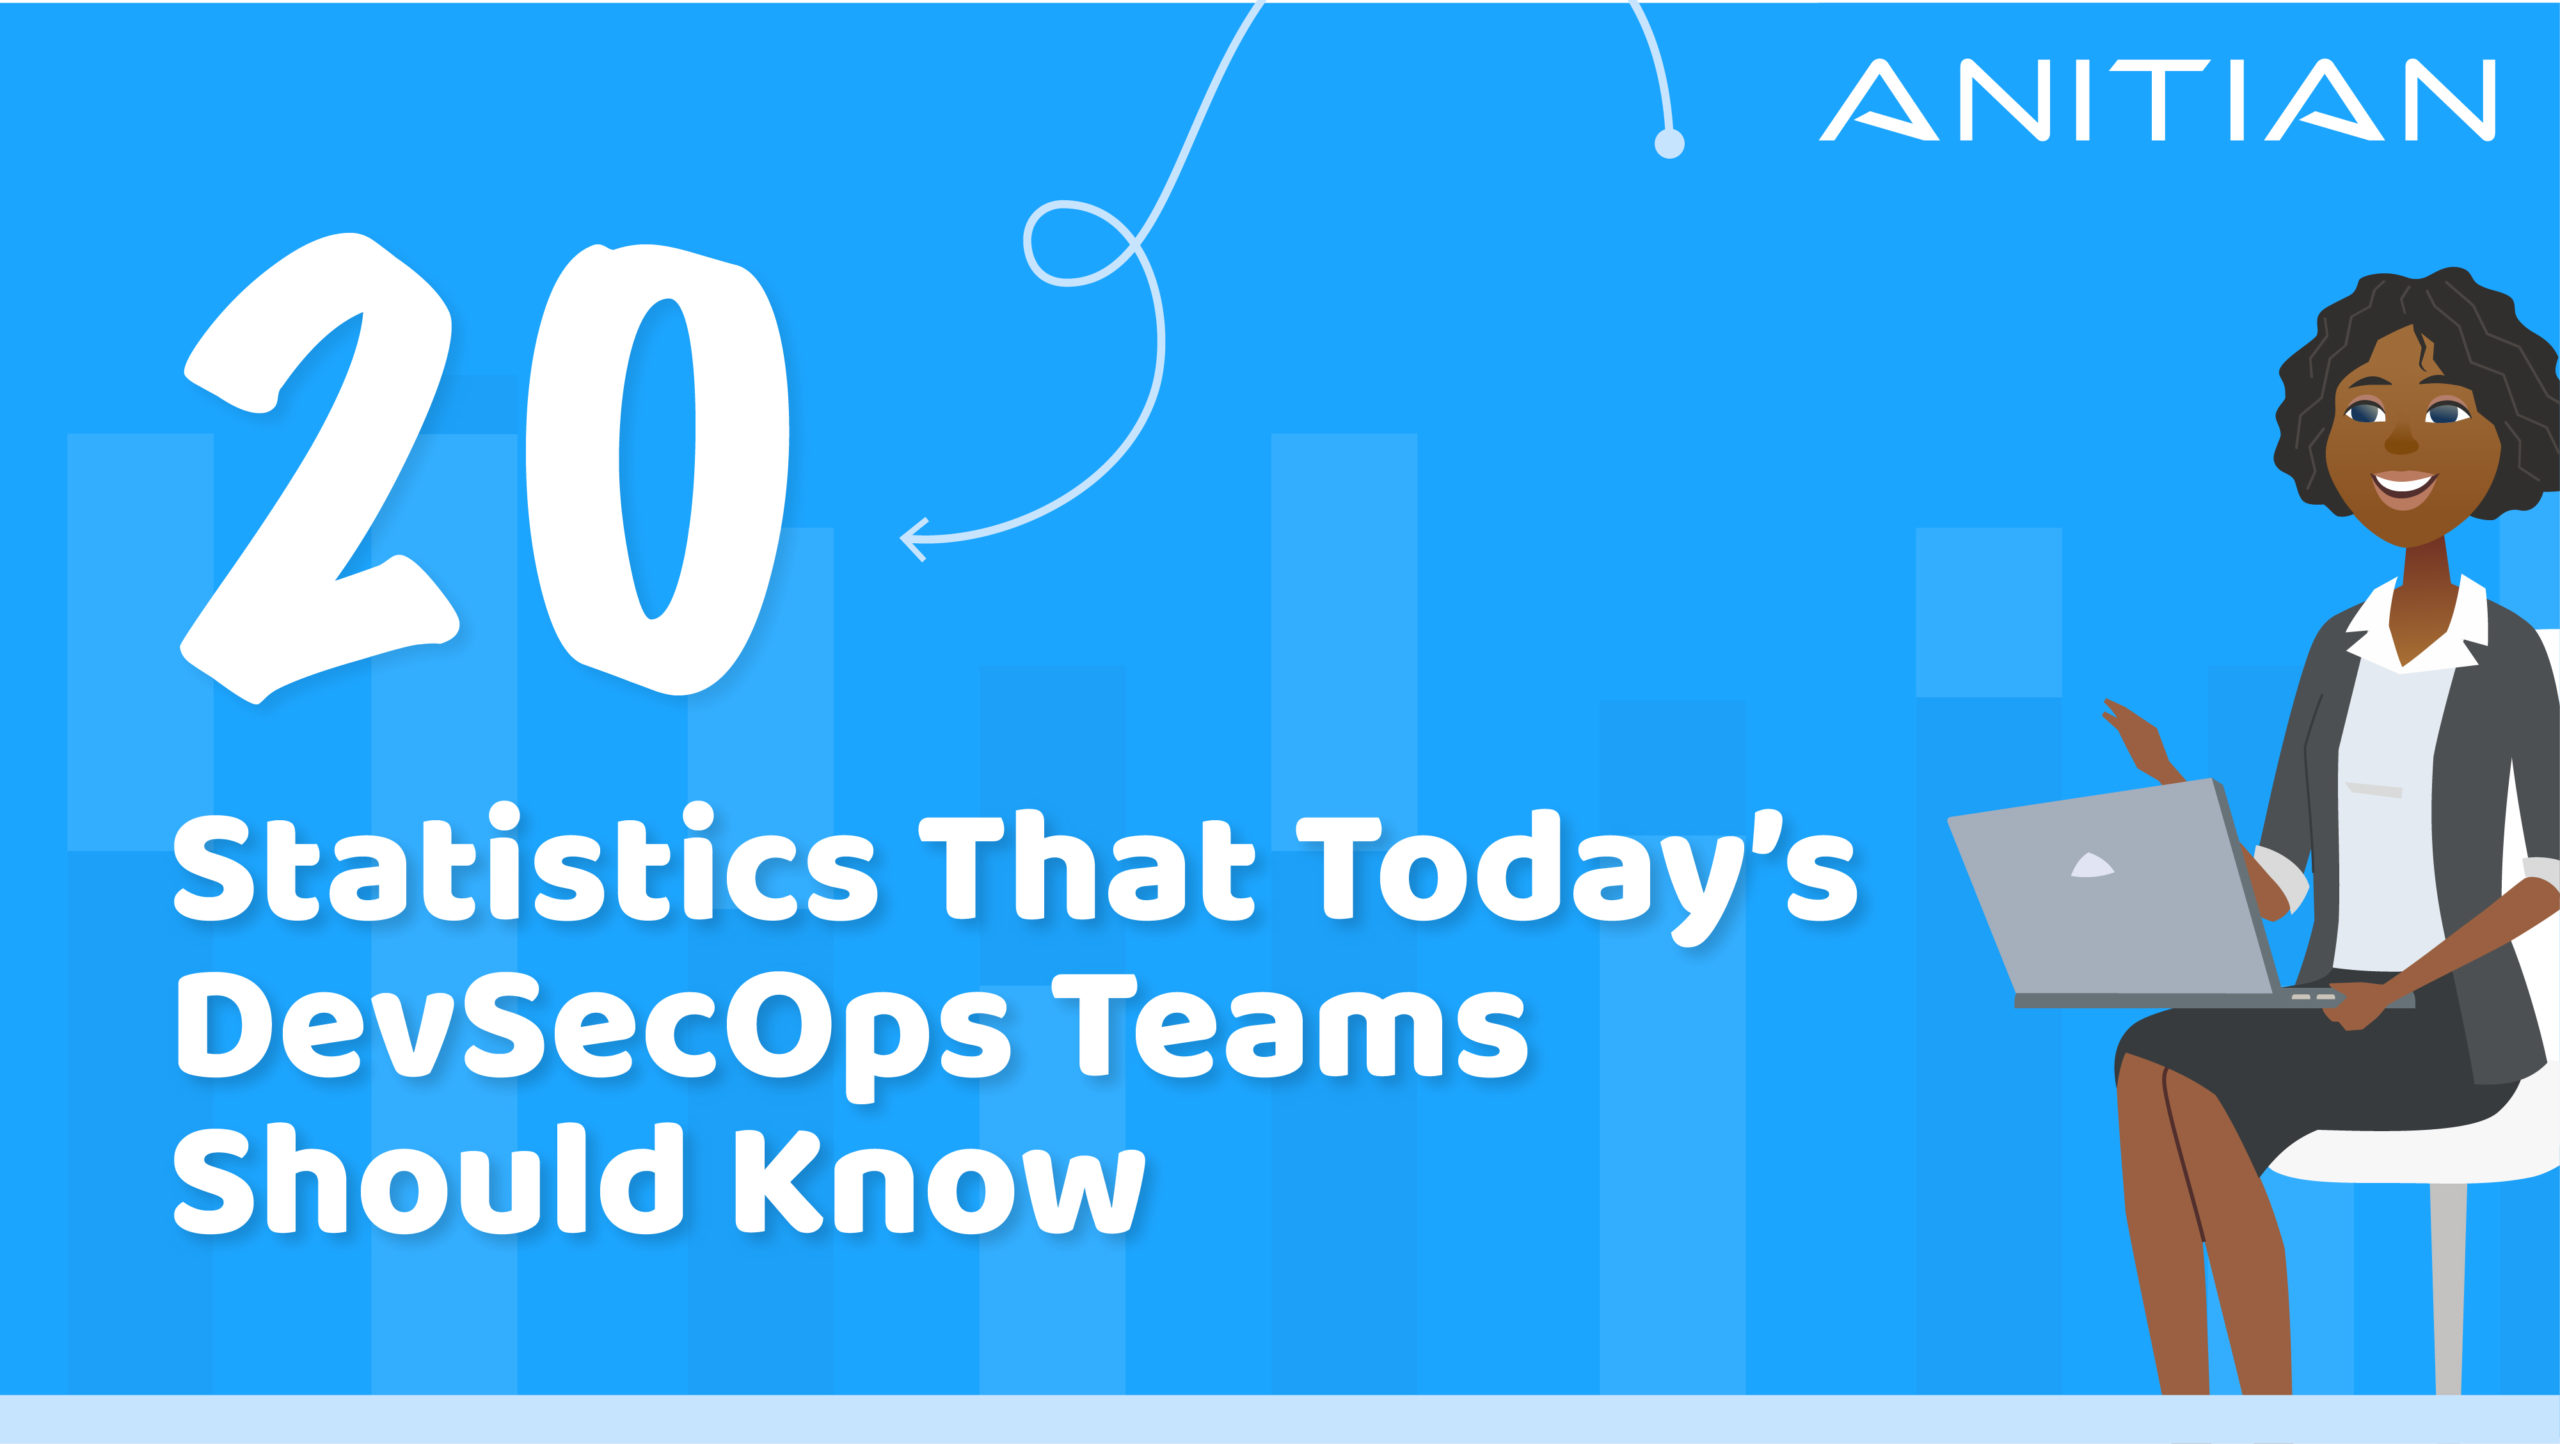 20 Statistics That Today’s DevSecOps Teams Should Know - Anitian